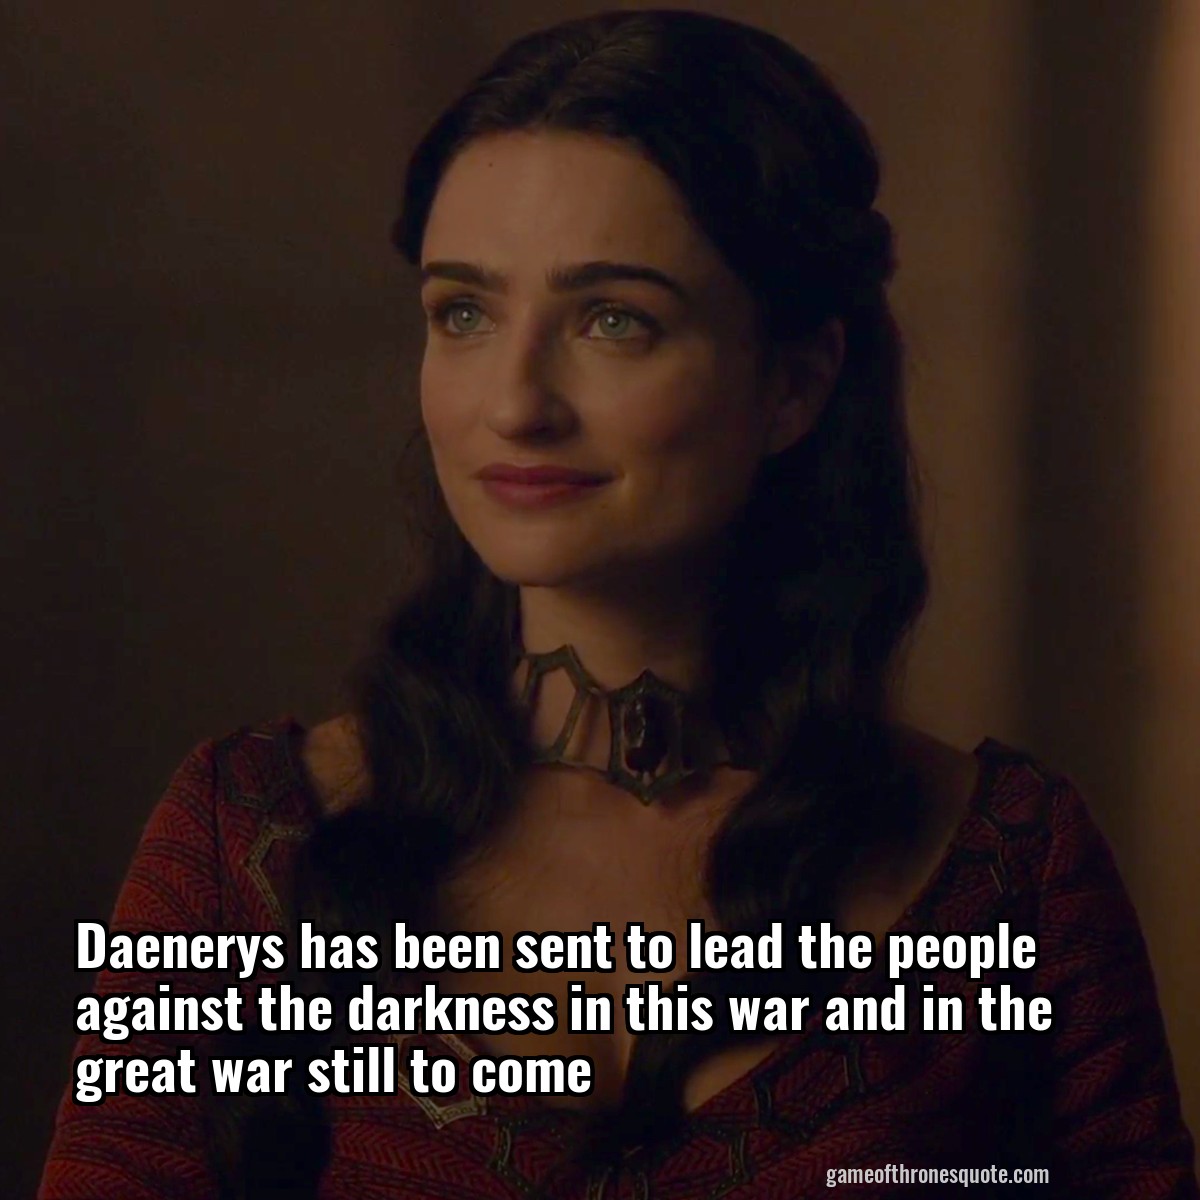 Daenerys has been sent to lead the people against the darkness in this war and in the great war still to come